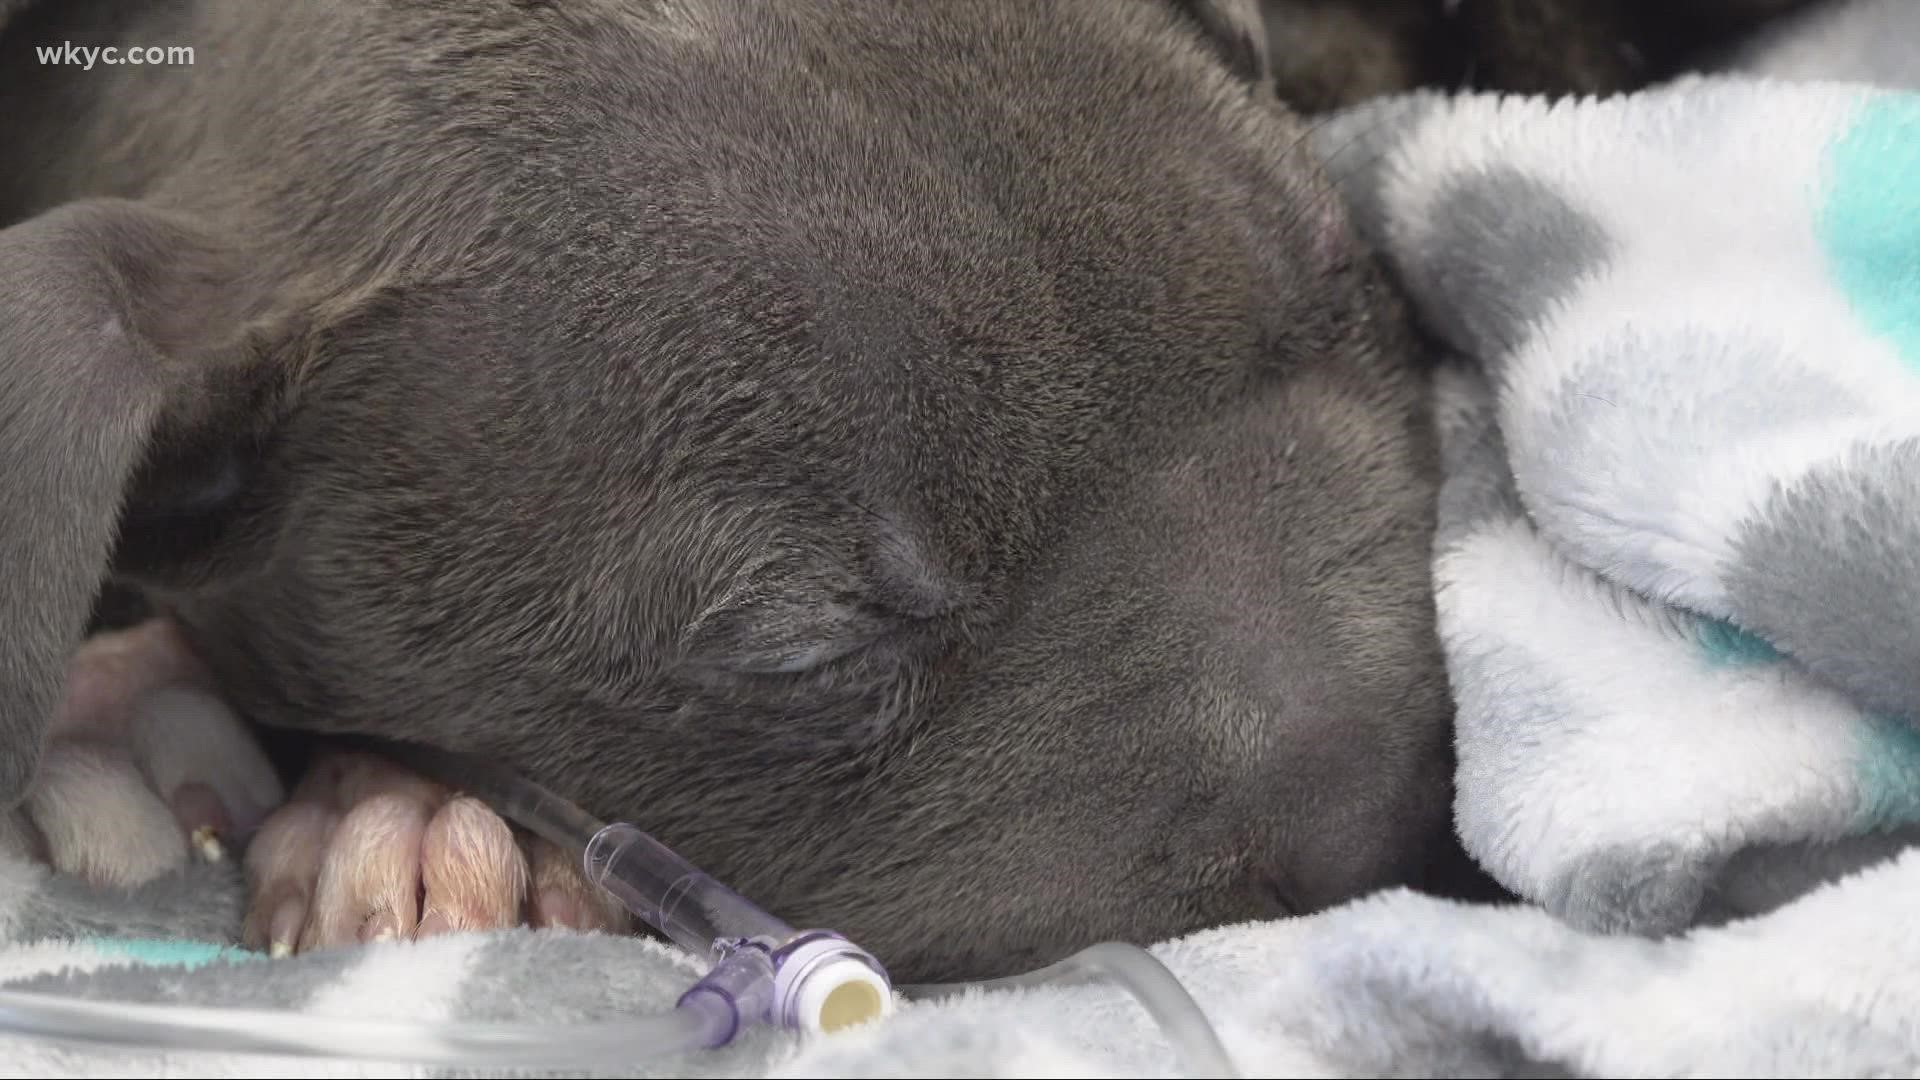 a local vet and animal rescue facility are hoping for a miracle after taking in an abused puppy. Emma Henderson has the story.